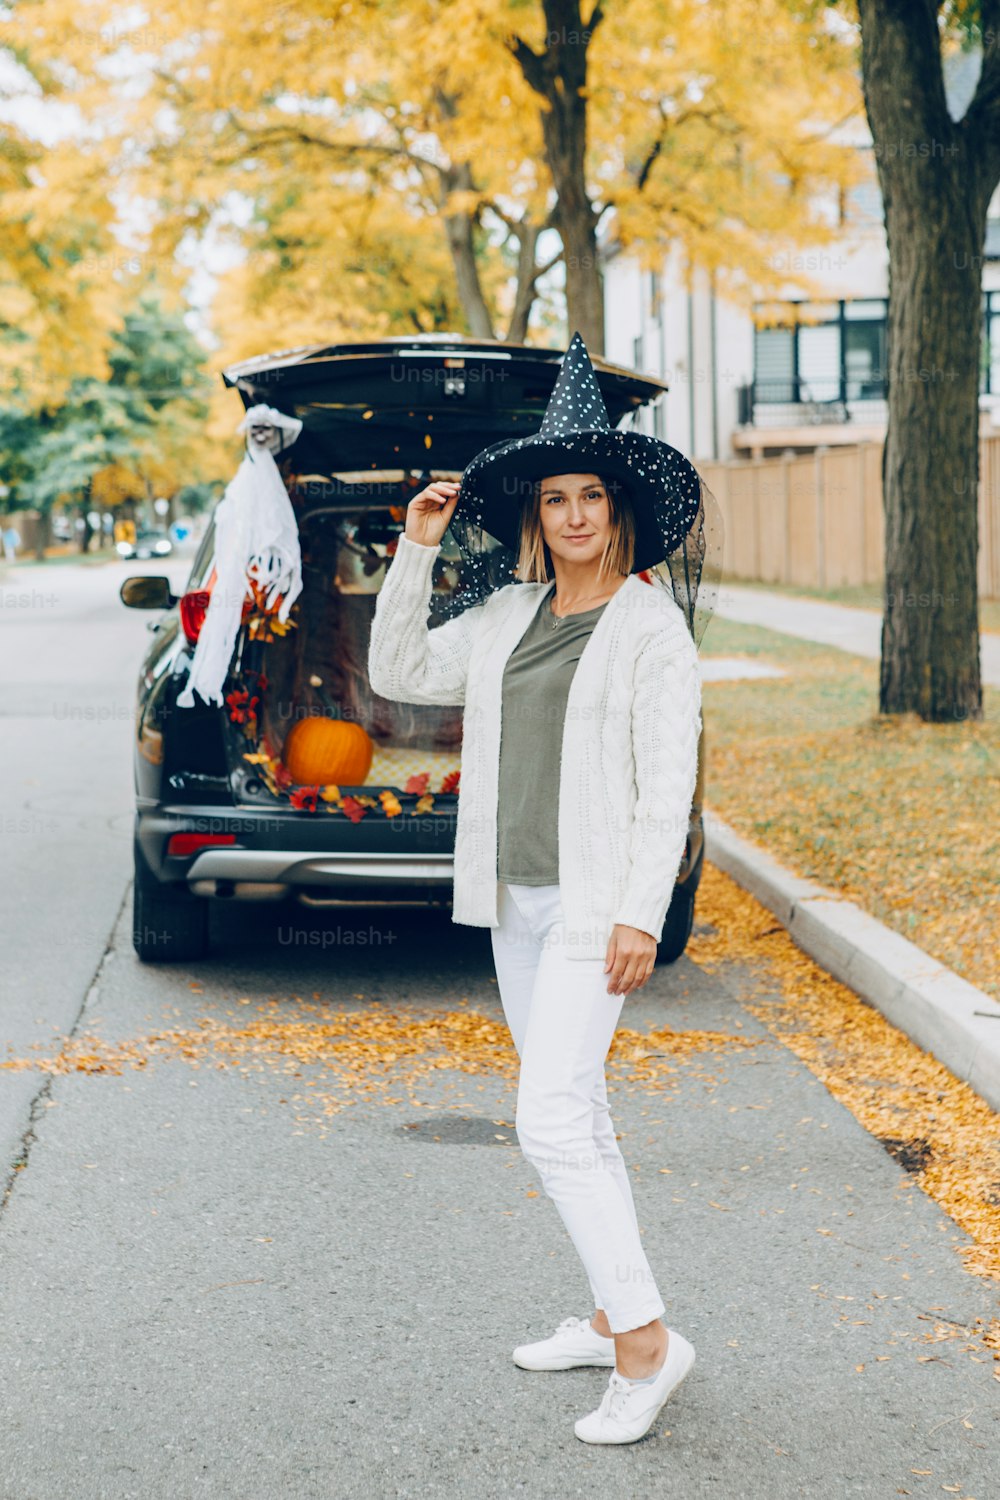 Trick or trunk. Woman in witch hat celebrating Halloween in trunk of car. Mother preparing for celebrating traditional October holiday outdoor. Social distance and safe alternative celebration.